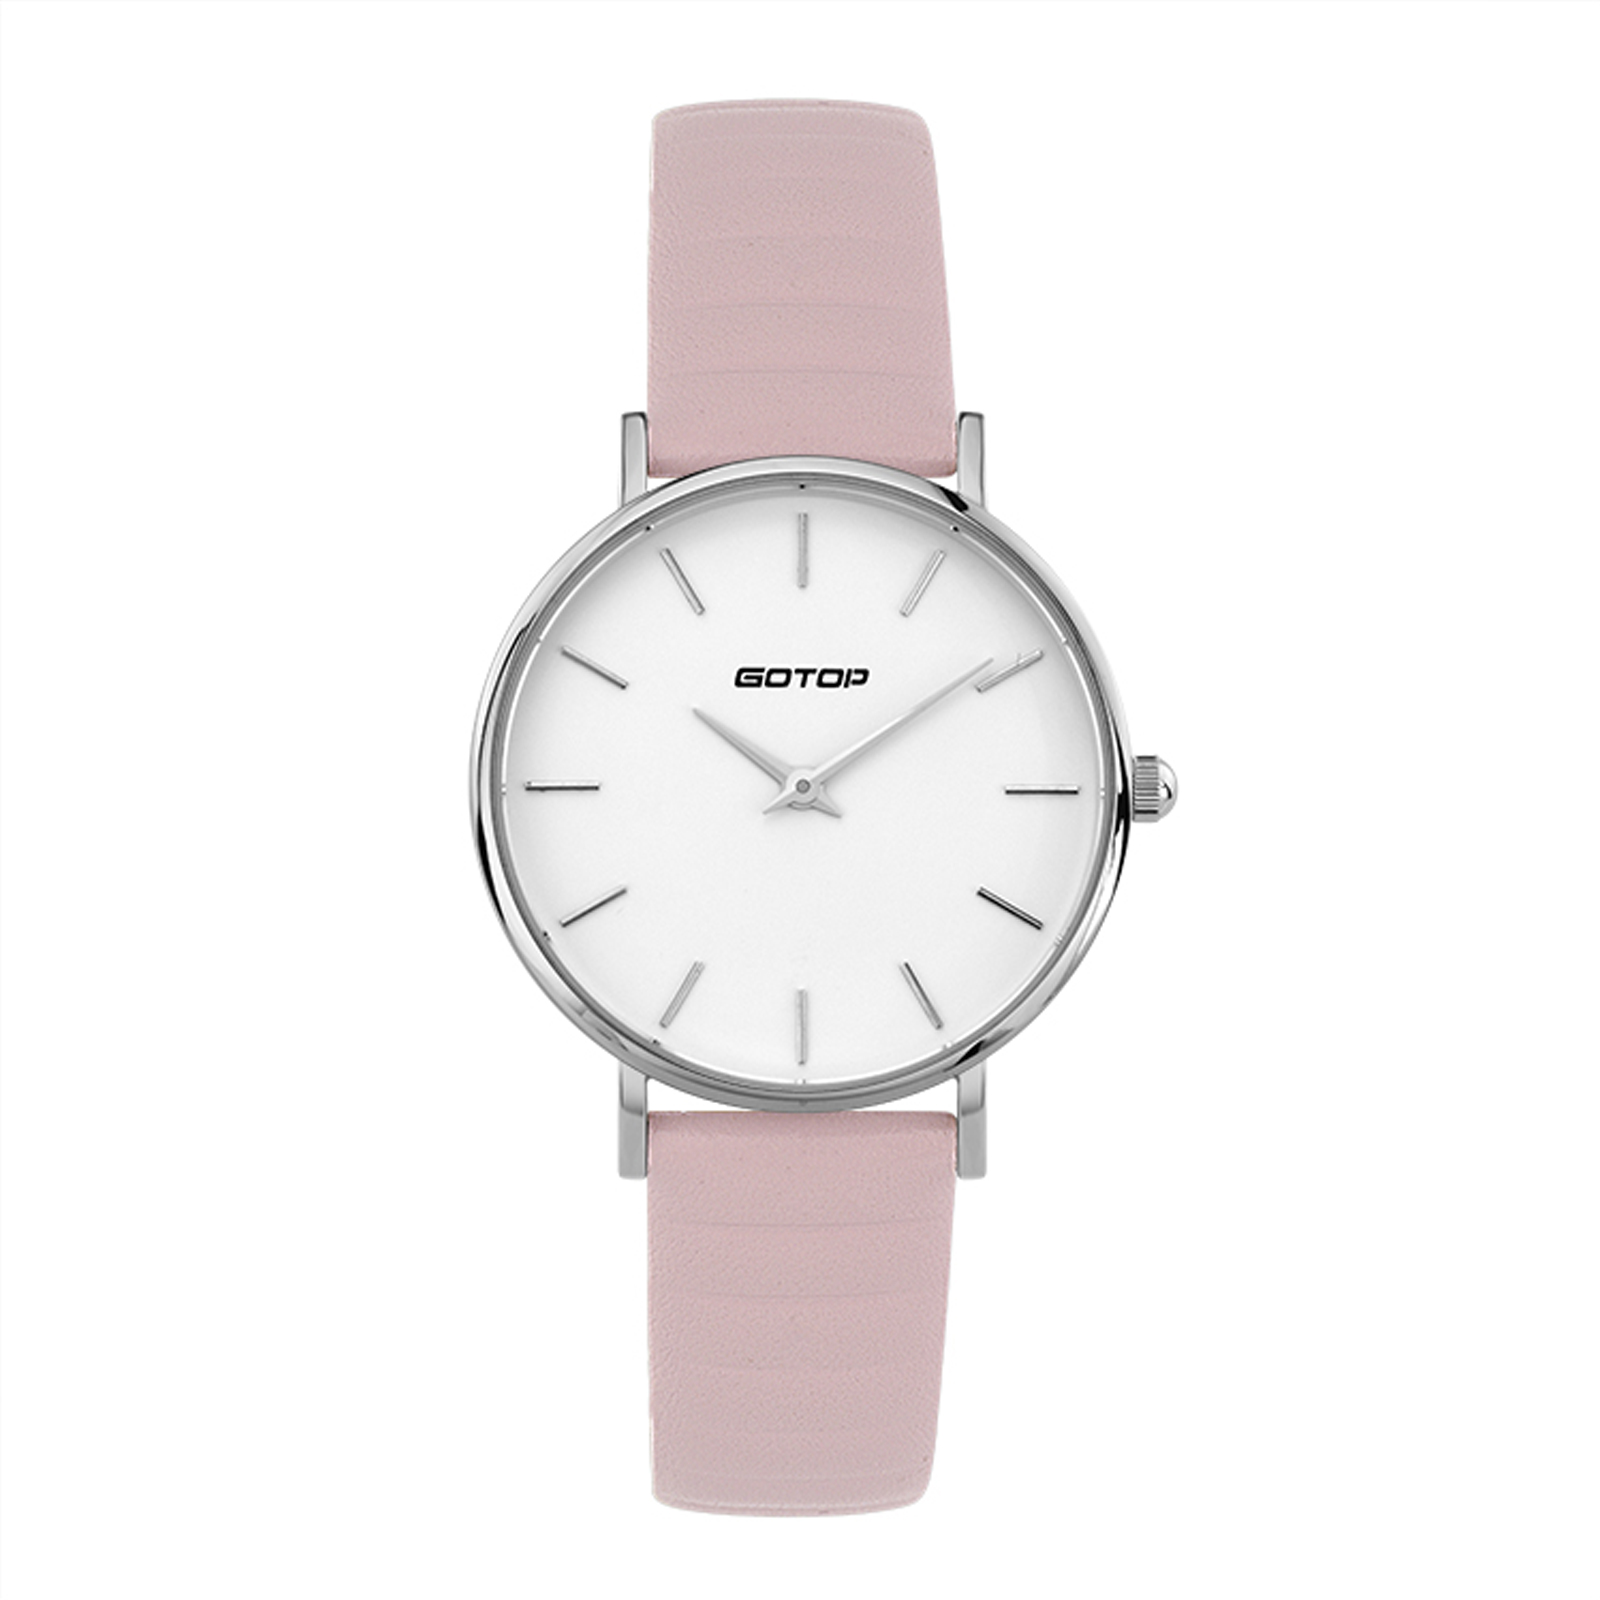 DW Style Silver And White Women's Watch With Pink Leather Strap